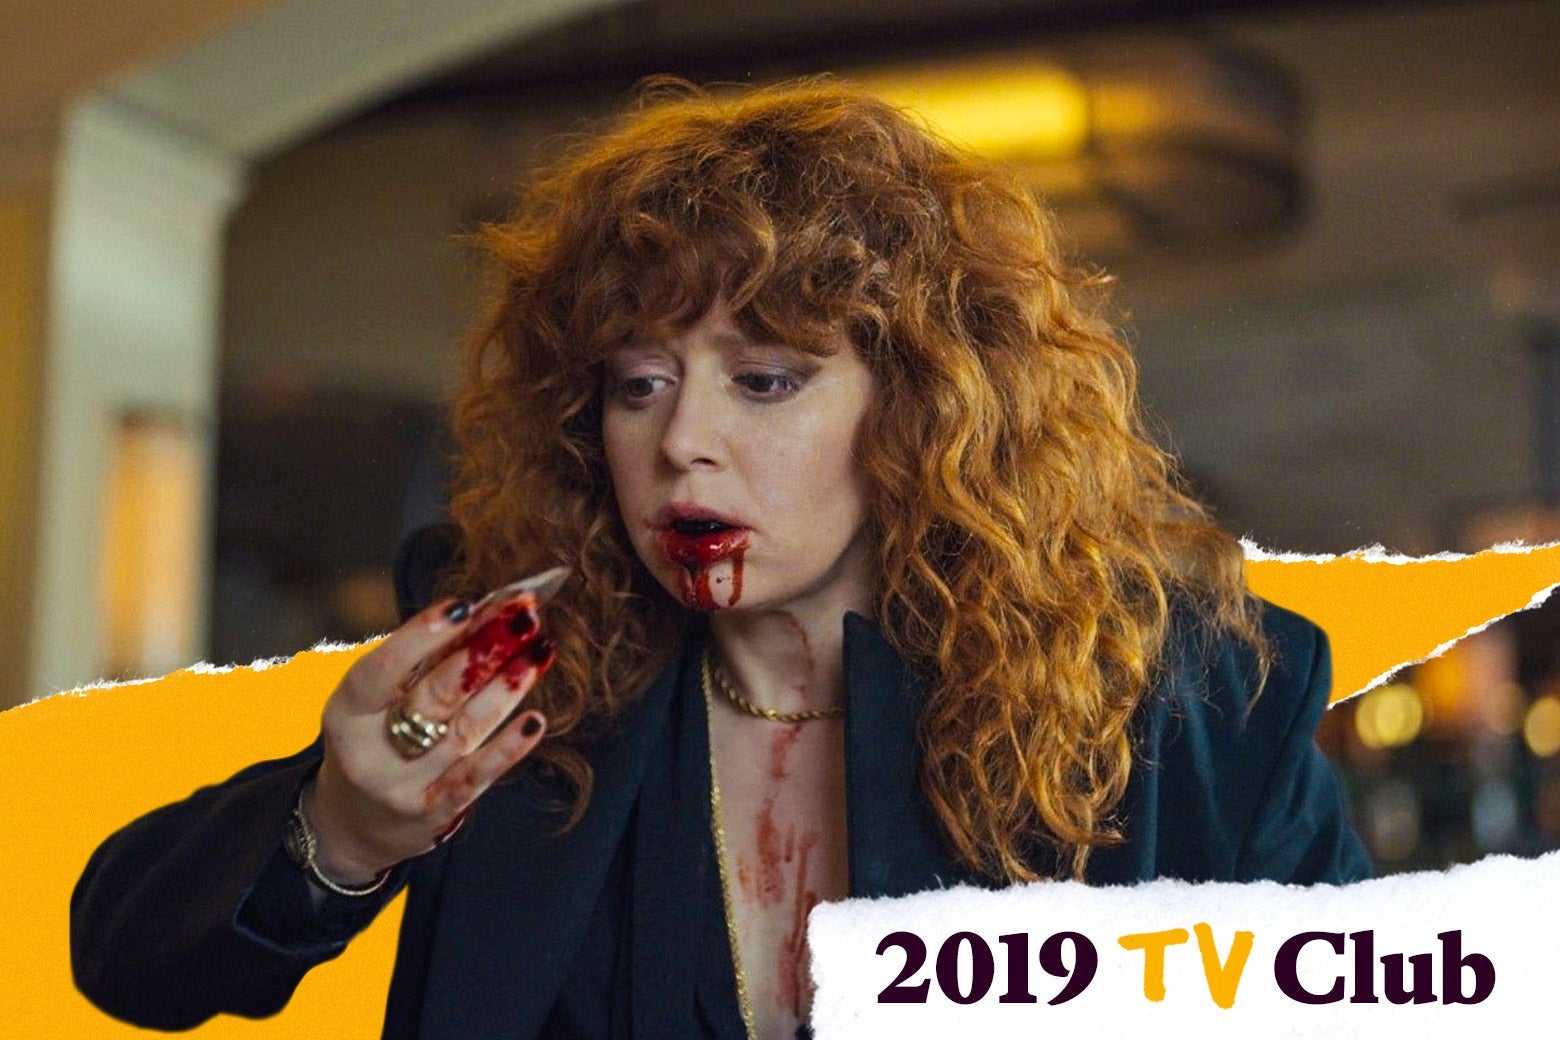 Natasha Lyonne holds and stares at a shard of glass she just pulled out of her mouth. Her hand and mouth are bloody.